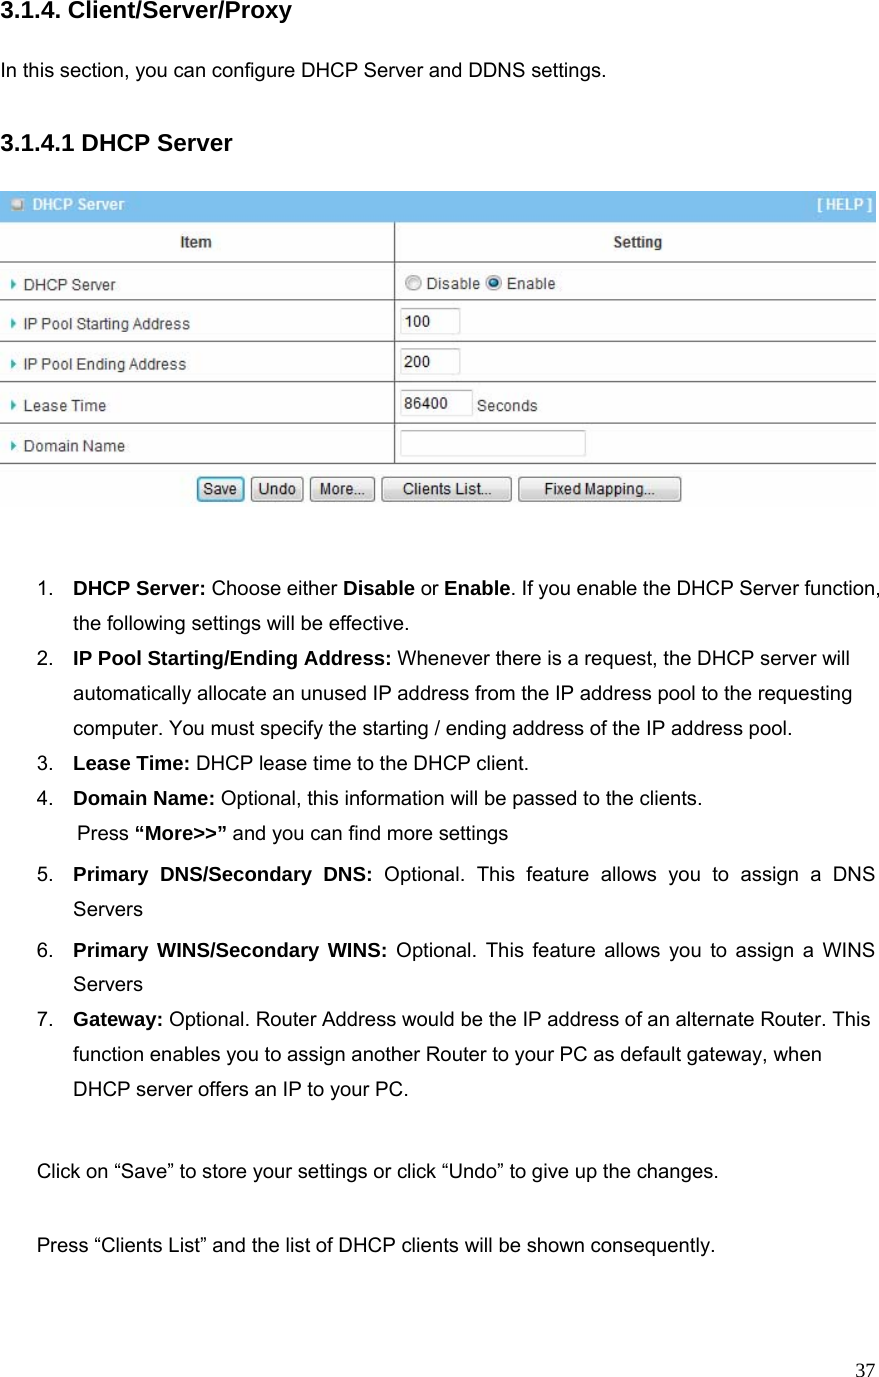  373.1.4. Client/Server/Proxy  In this section, you can configure DHCP Server and DDNS settings.  3.1.4.1 DHCP Server     1.  DHCP Server: Choose either Disable or Enable. If you enable the DHCP Server function, the following settings will be effective. 2.  IP Pool Starting/Ending Address: Whenever there is a request, the DHCP server will automatically allocate an unused IP address from the IP address pool to the requesting computer. You must specify the starting / ending address of the IP address pool. 3.  Lease Time: DHCP lease time to the DHCP client. 4.  Domain Name: Optional, this information will be passed to the clients. Press “More&gt;&gt;” and you can find more settings 5.  Primary DNS/Secondary DNS: Optional. This feature allows you to assign a DNS Servers 6.  Primary WINS/Secondary WINS: Optional. This feature allows you to assign a WINS Servers 7.  Gateway: Optional. Router Address would be the IP address of an alternate Router. This function enables you to assign another Router to your PC as default gateway, when DHCP server offers an IP to your PC.  Click on “Save” to store your settings or click “Undo” to give up the changes.  Press “Clients List” and the list of DHCP clients will be shown consequently.           